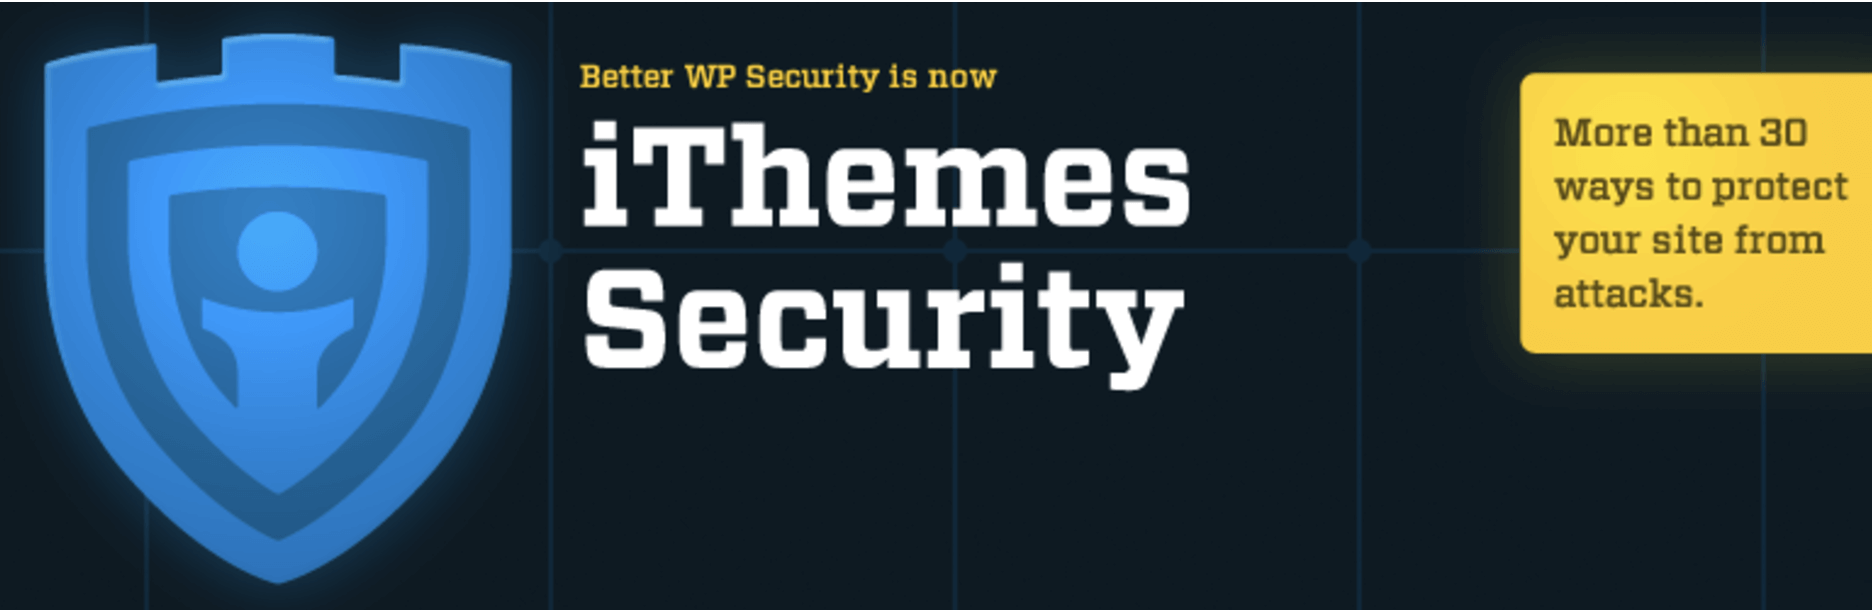 iThemes Security formerly Better WP Security — WordPress Security Plugin